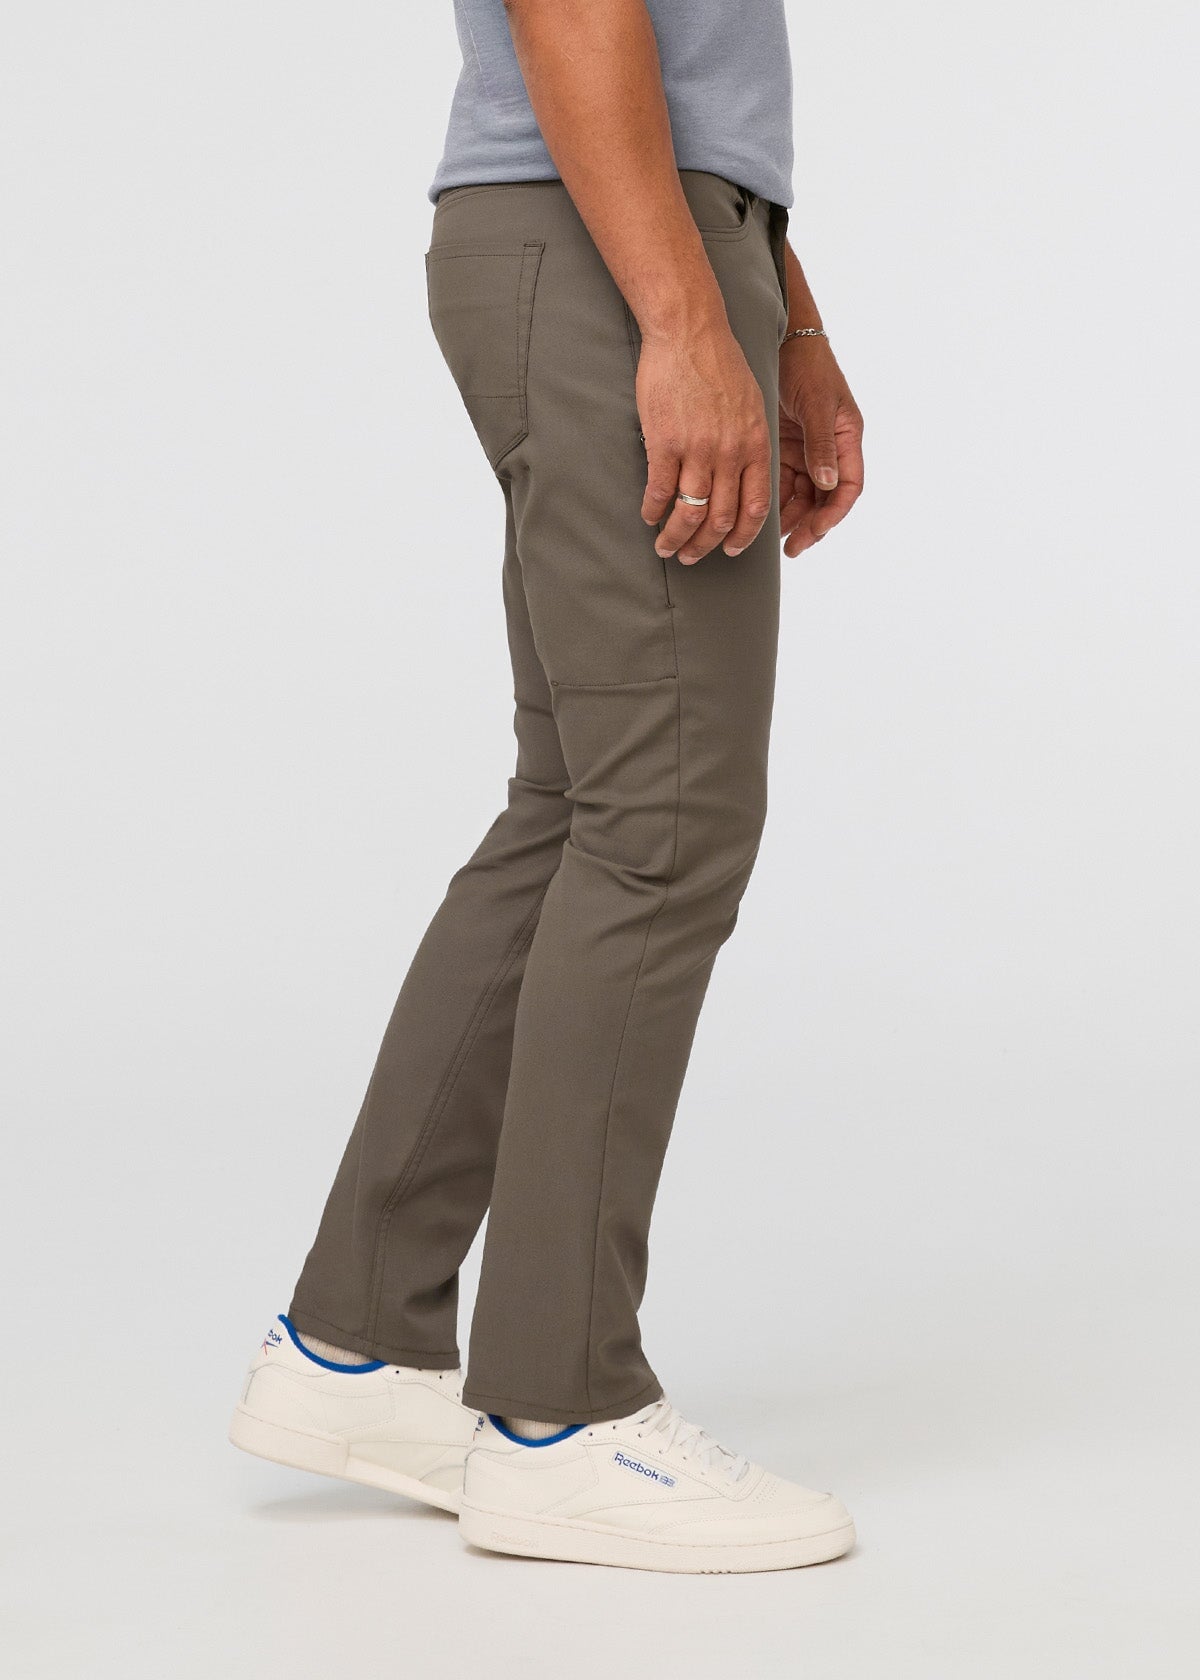 mens grey-green relaxed fit stretch pants side